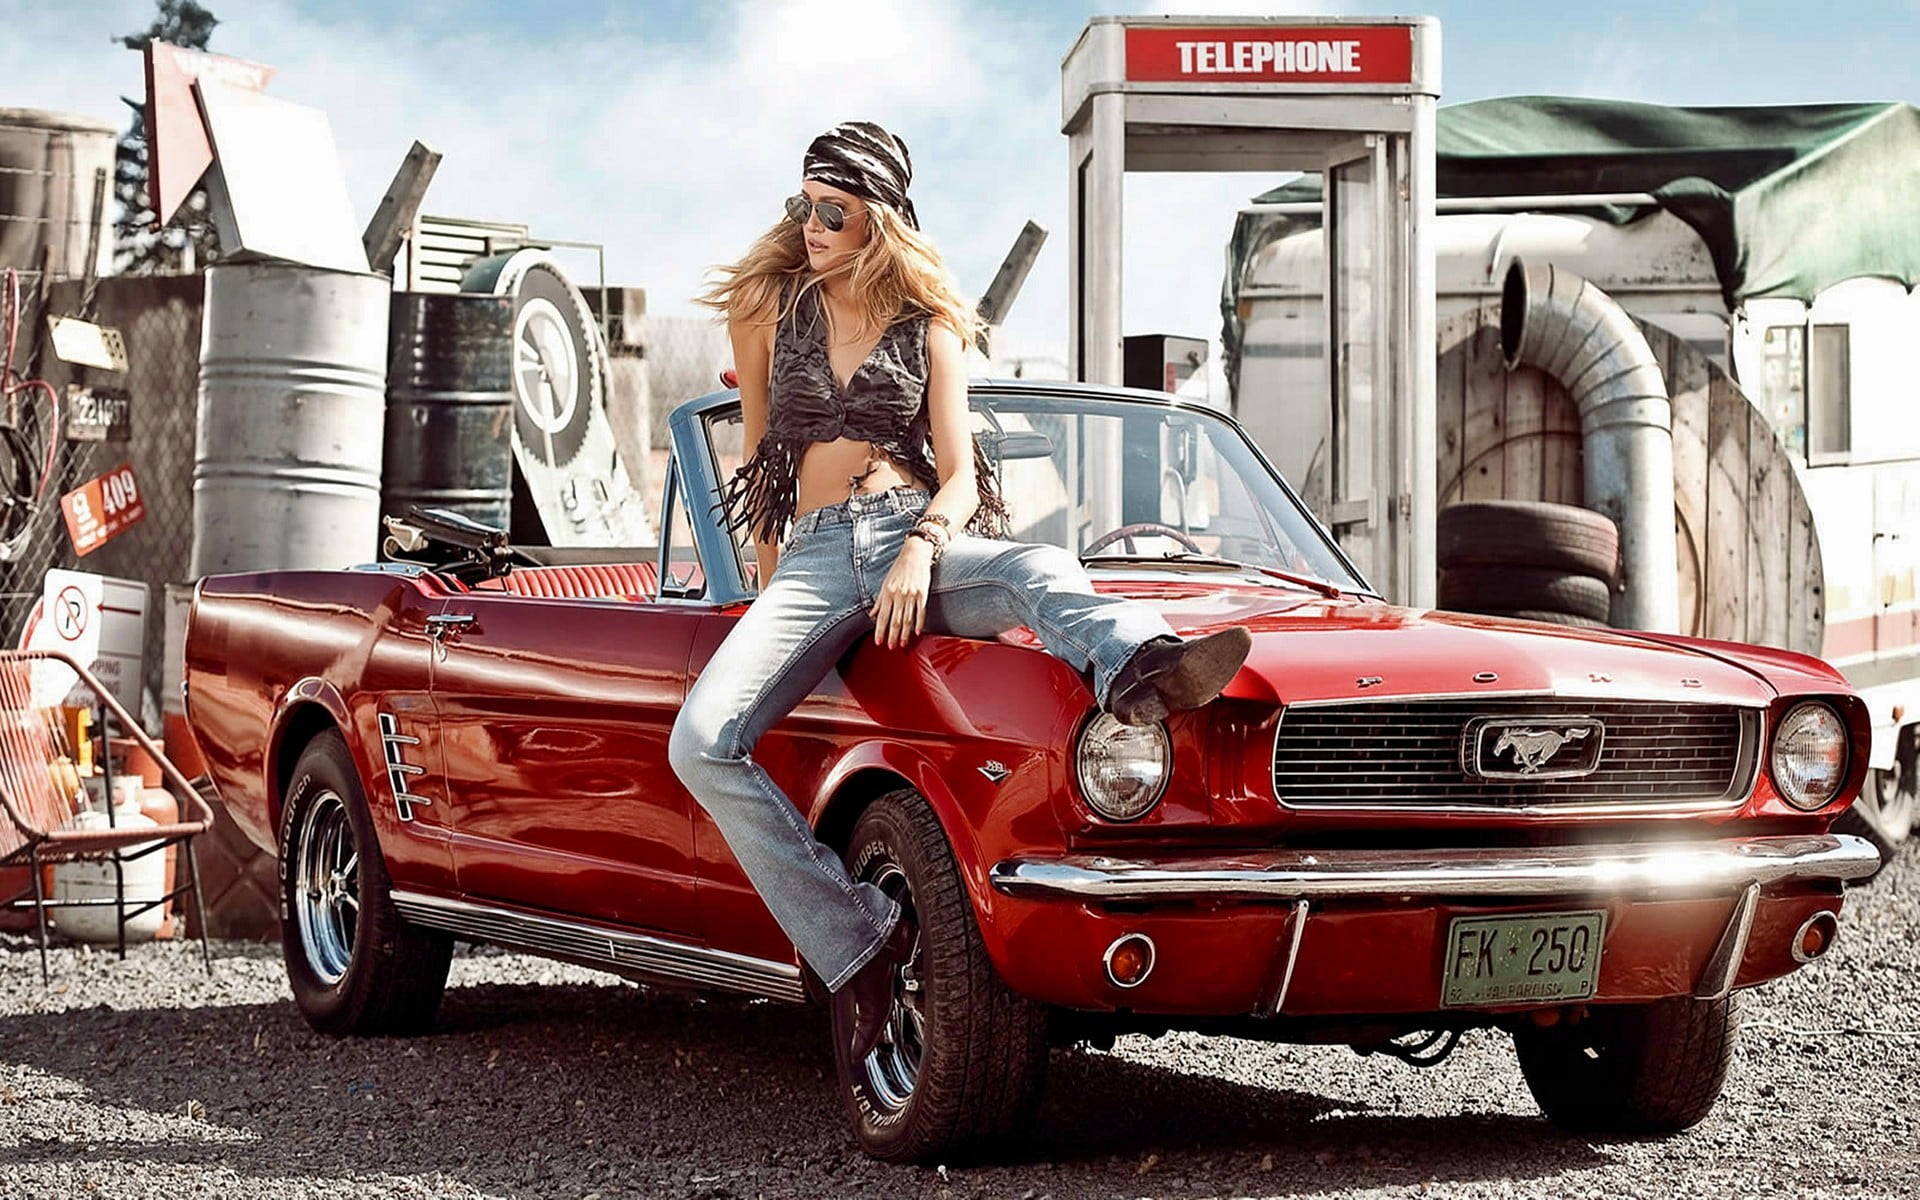 classic red Ford Mustang convertible coupe, car, Ford Mustang, women, old c...